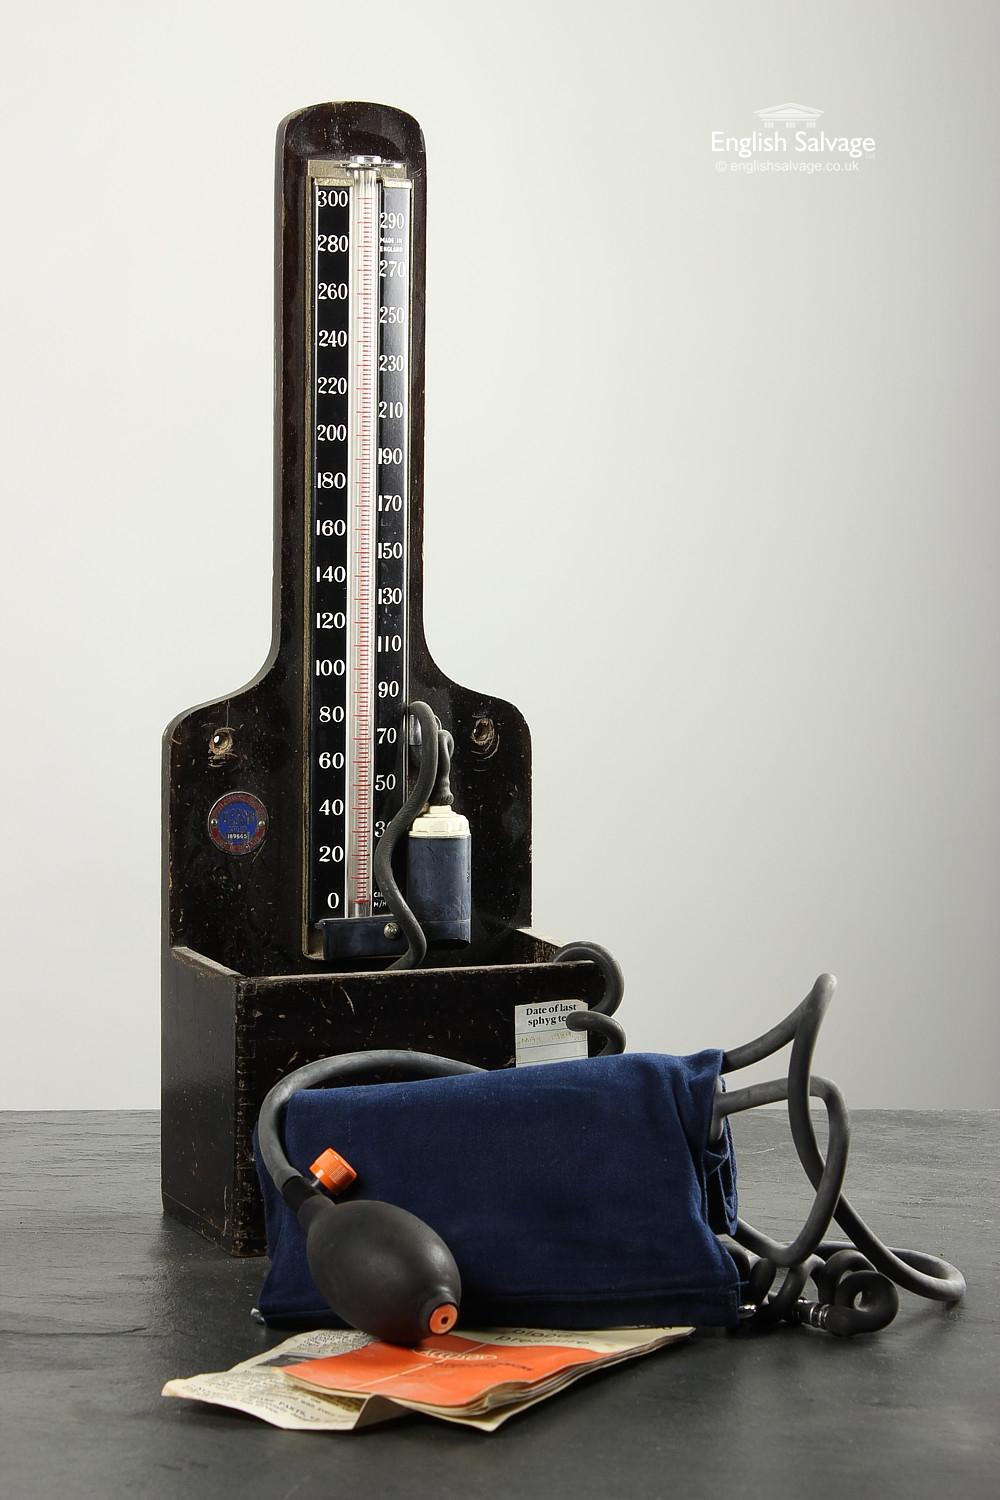 Vintage English made Accoson sphygmomanometer (an instrument for measuring blood pressure, typically consisting of an inflatable rubber cuff which is applied to the arm and connected to a column of mercury next to a graduated scale, enabling the